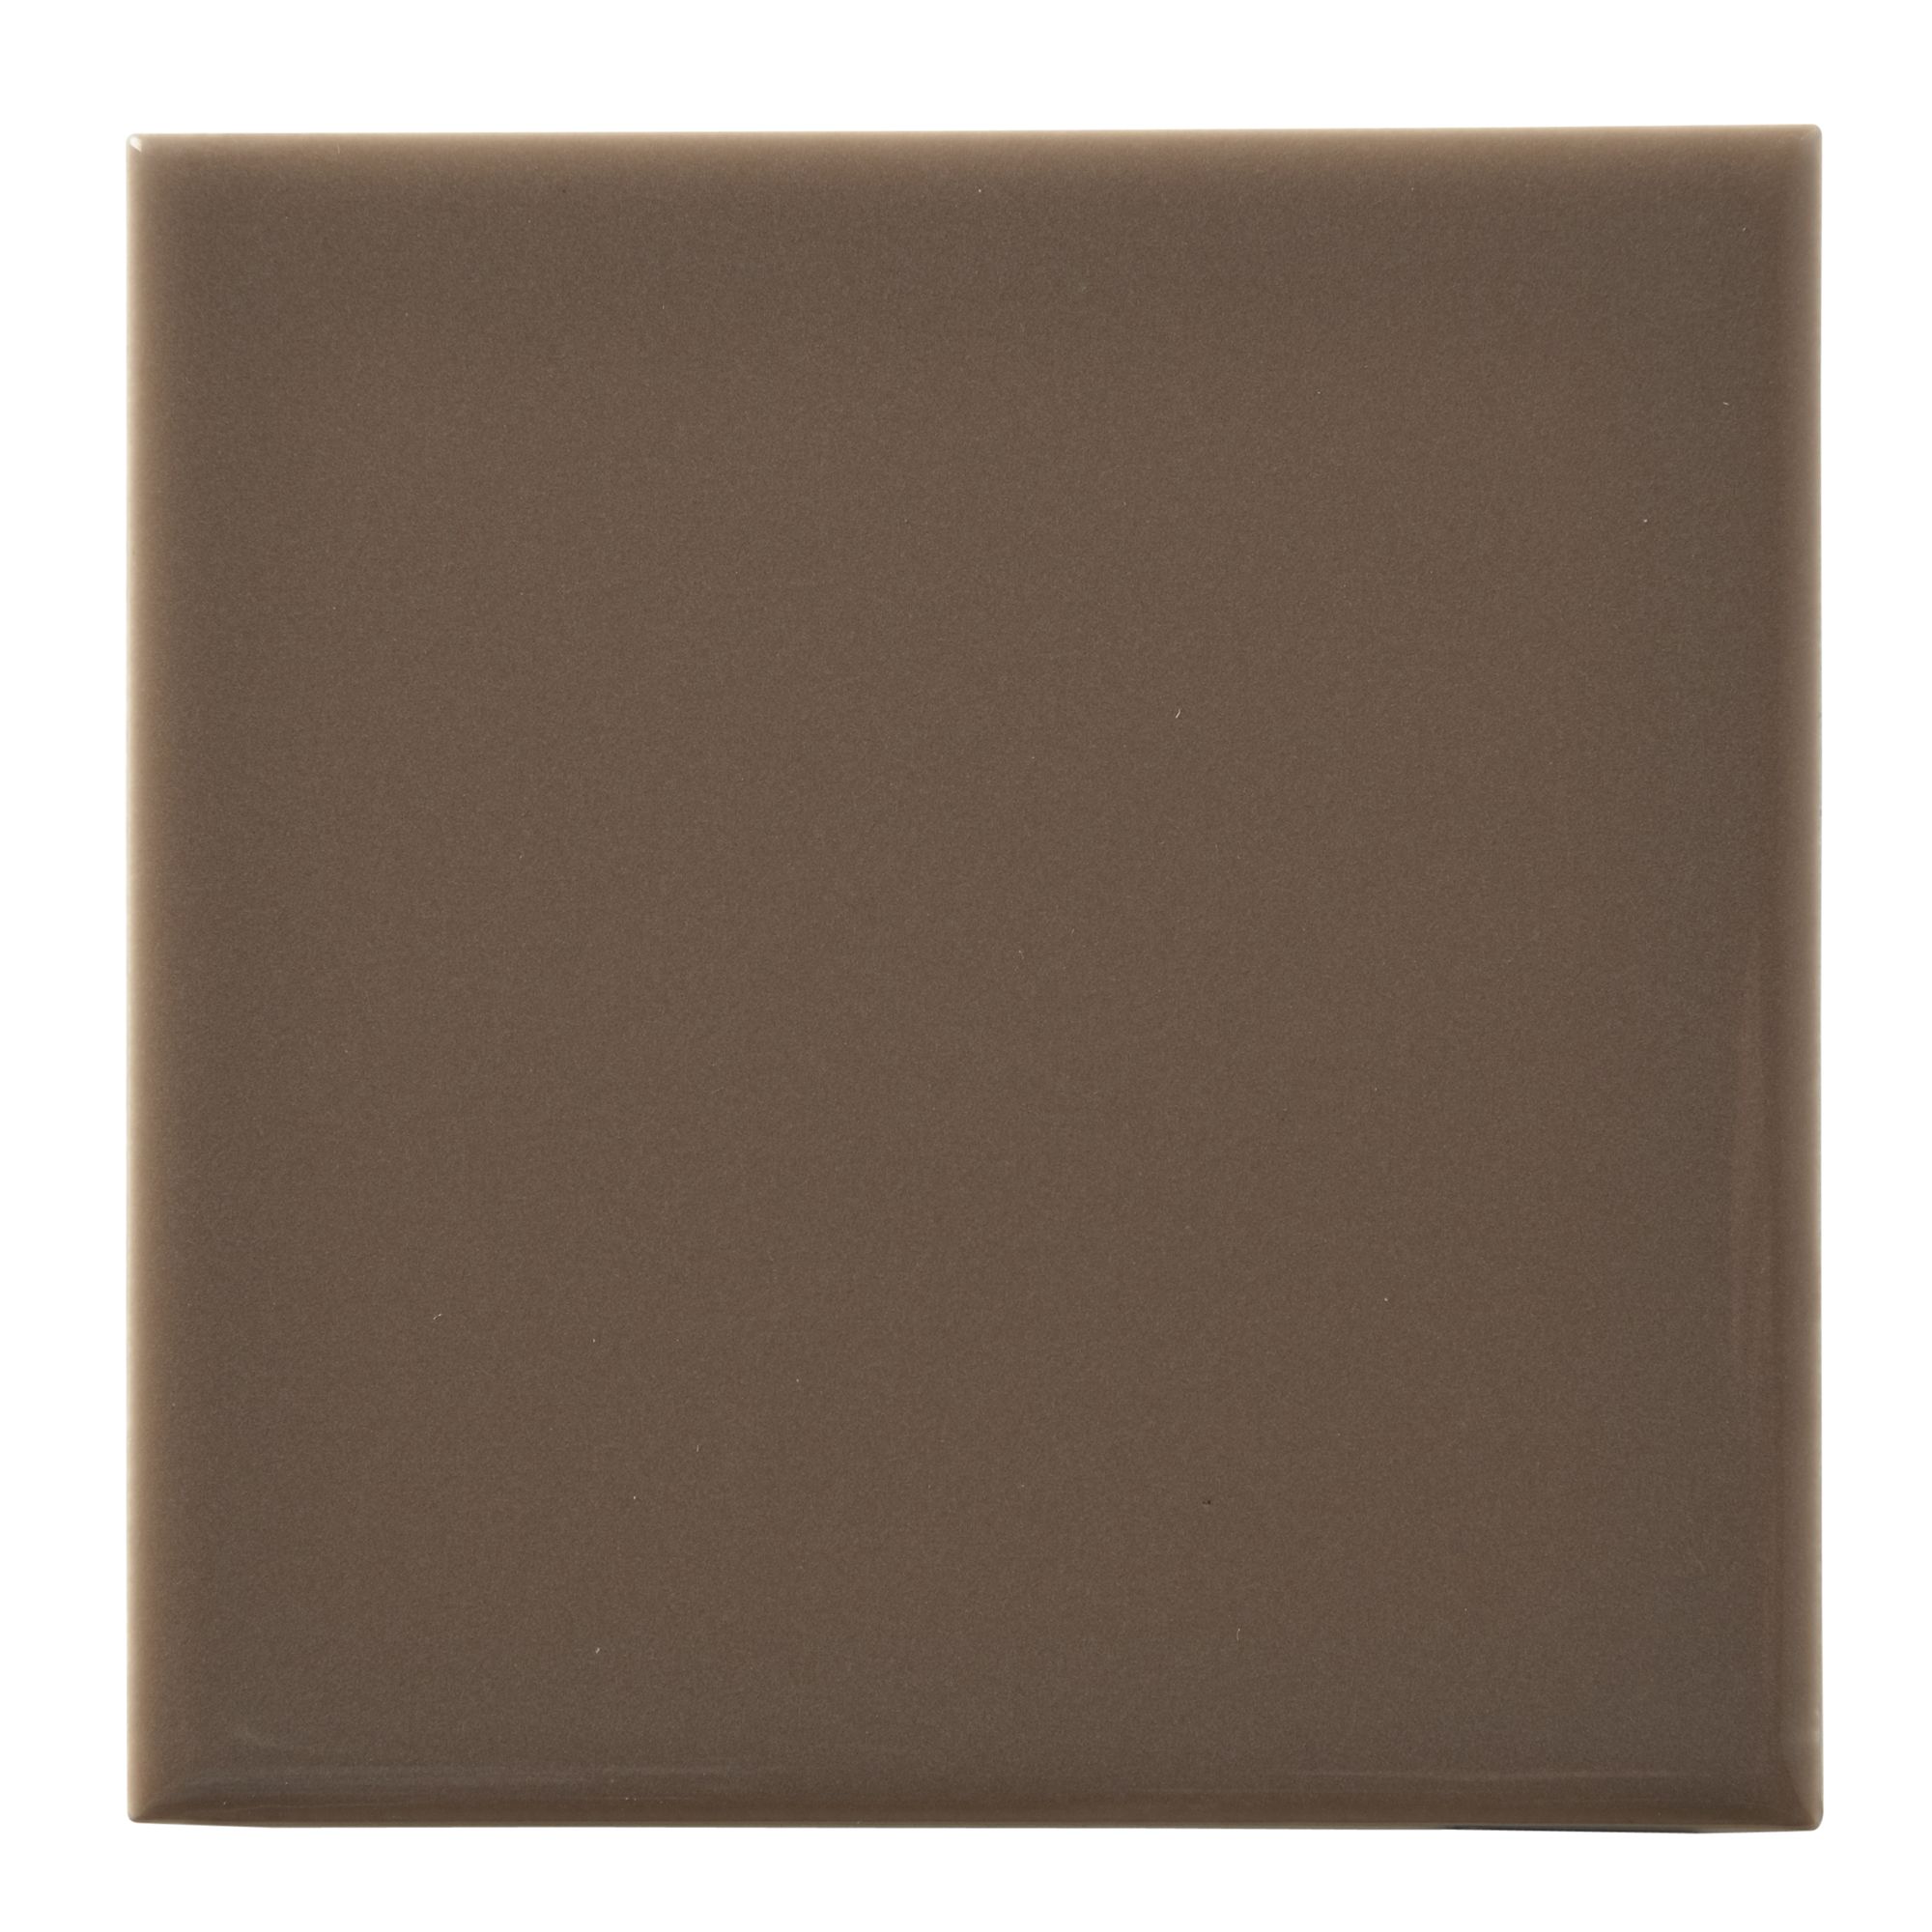 Utopia Taupe Gloss Wood effect Ceramic Wall Tile, Pack of 25, (L)100mm (W)100mm